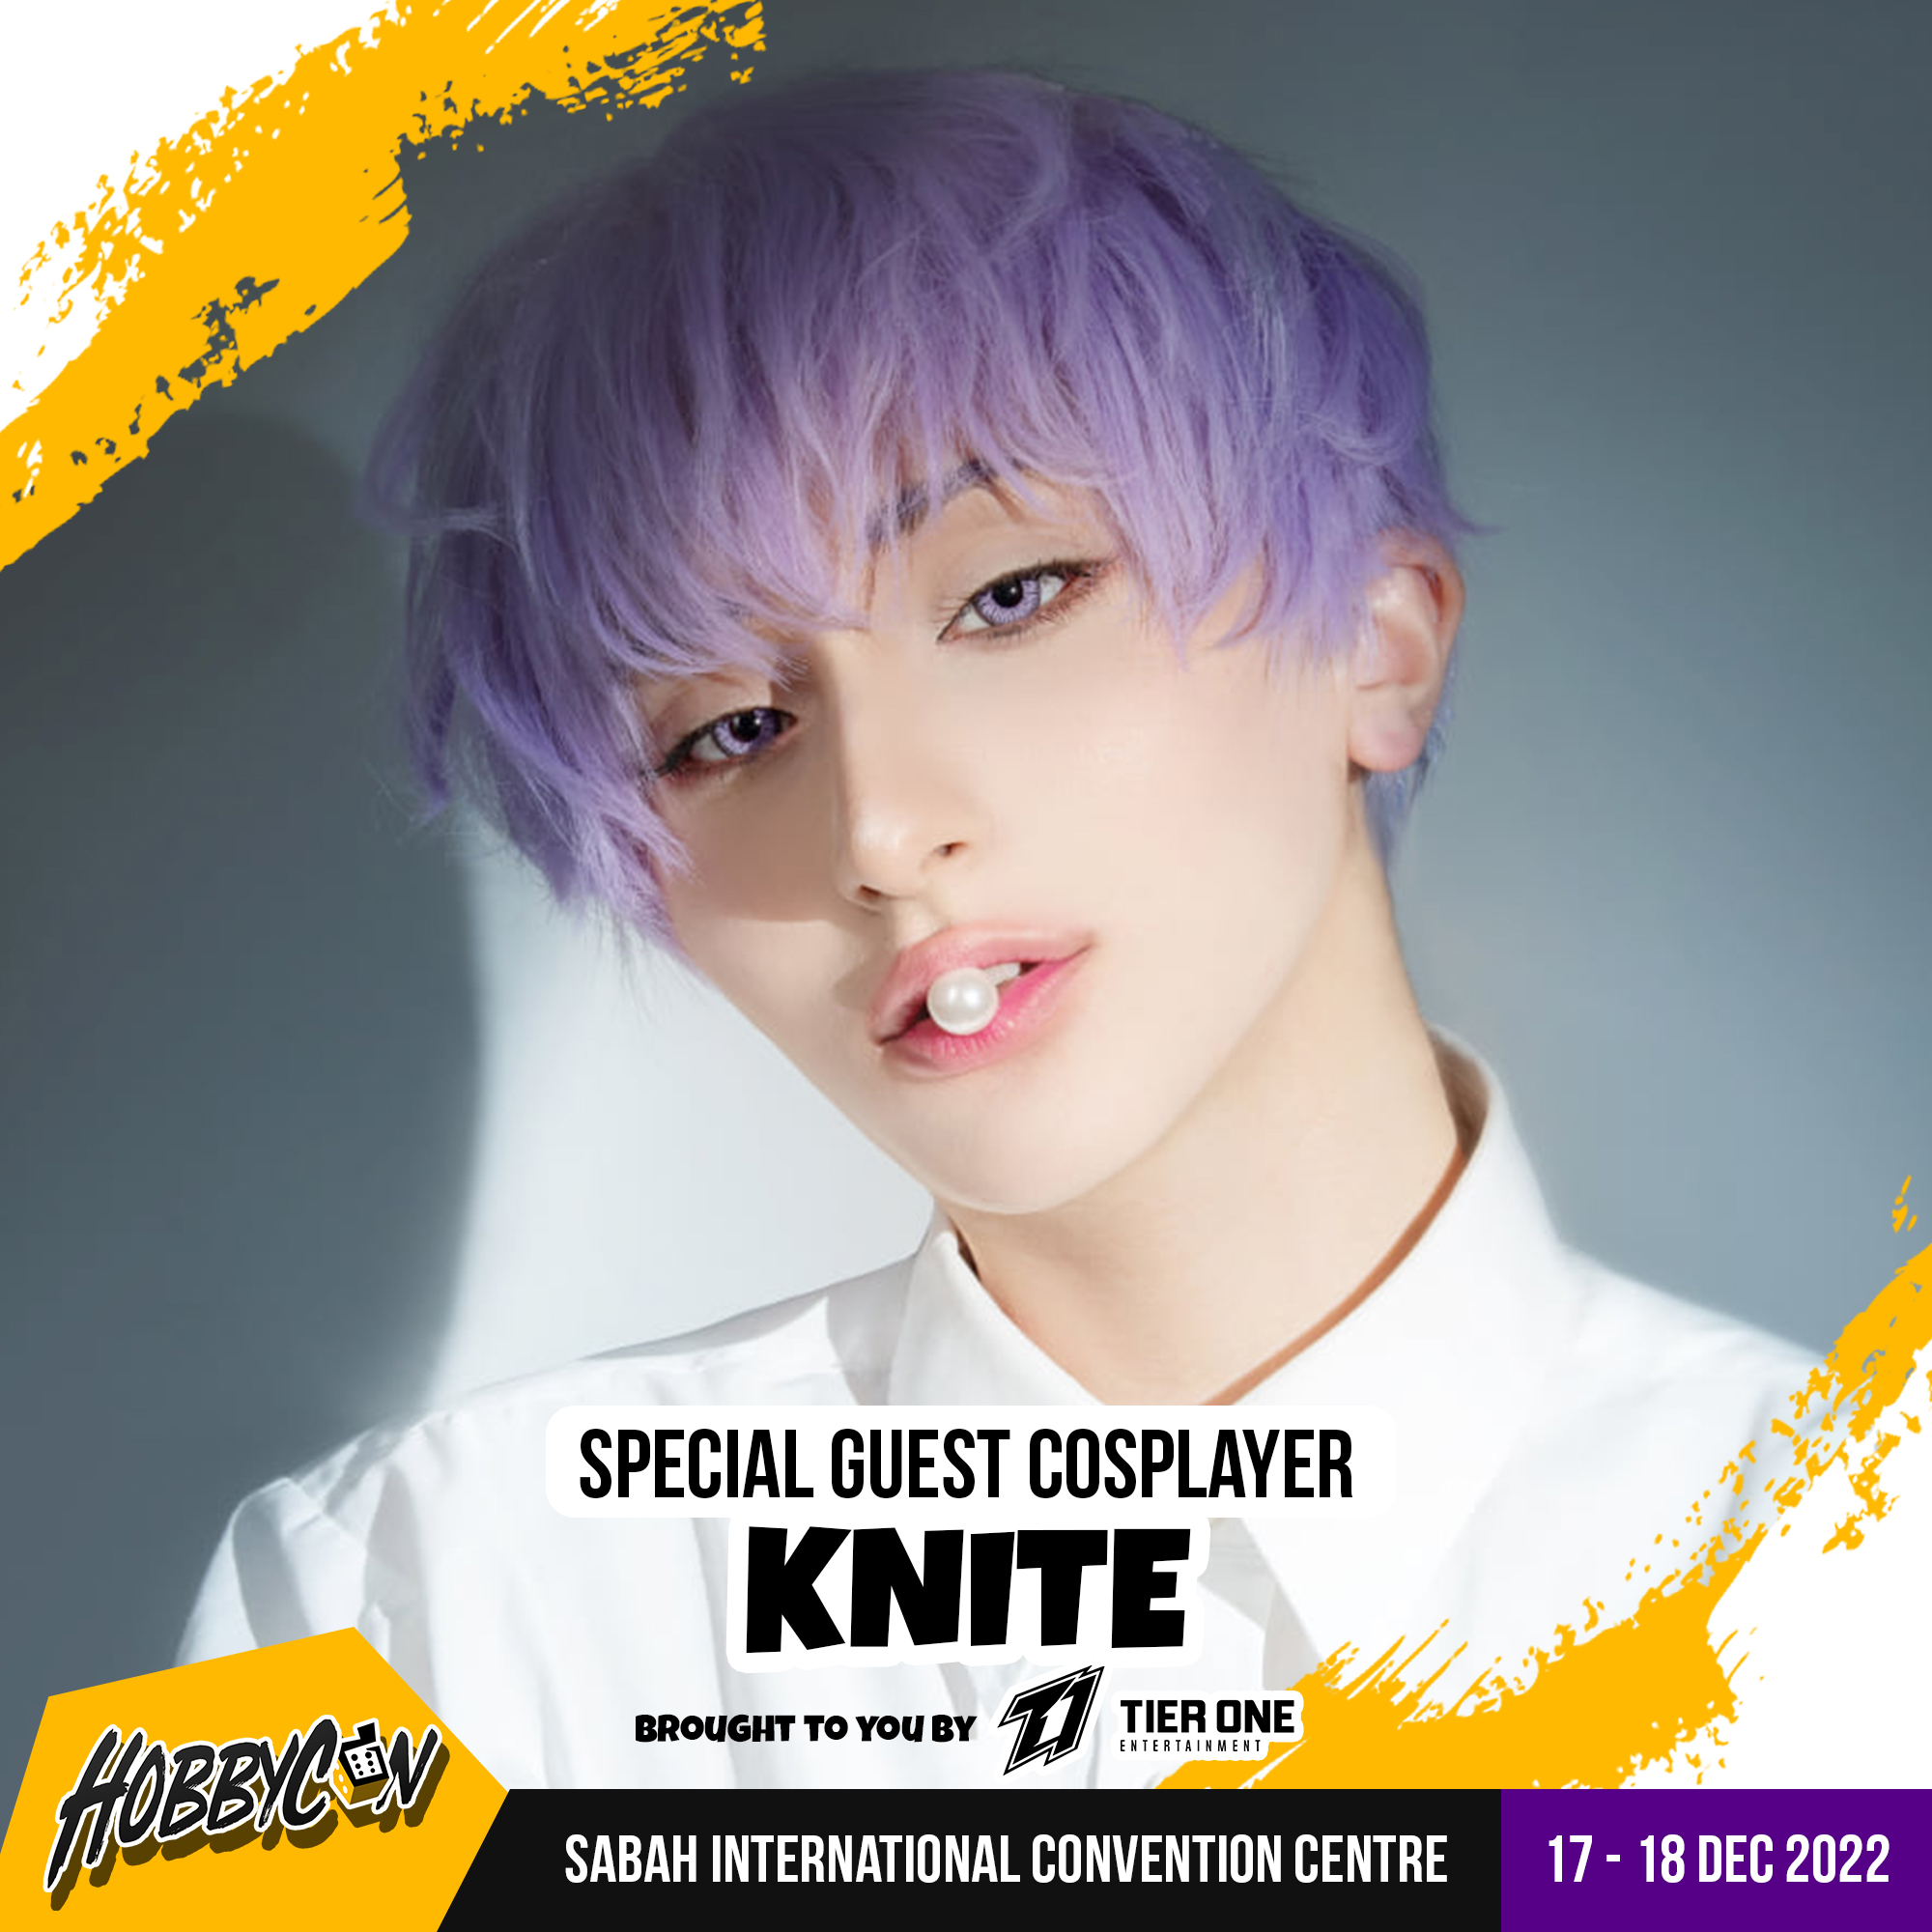 SPECIAL GUEST COSPLAYER - KNITE